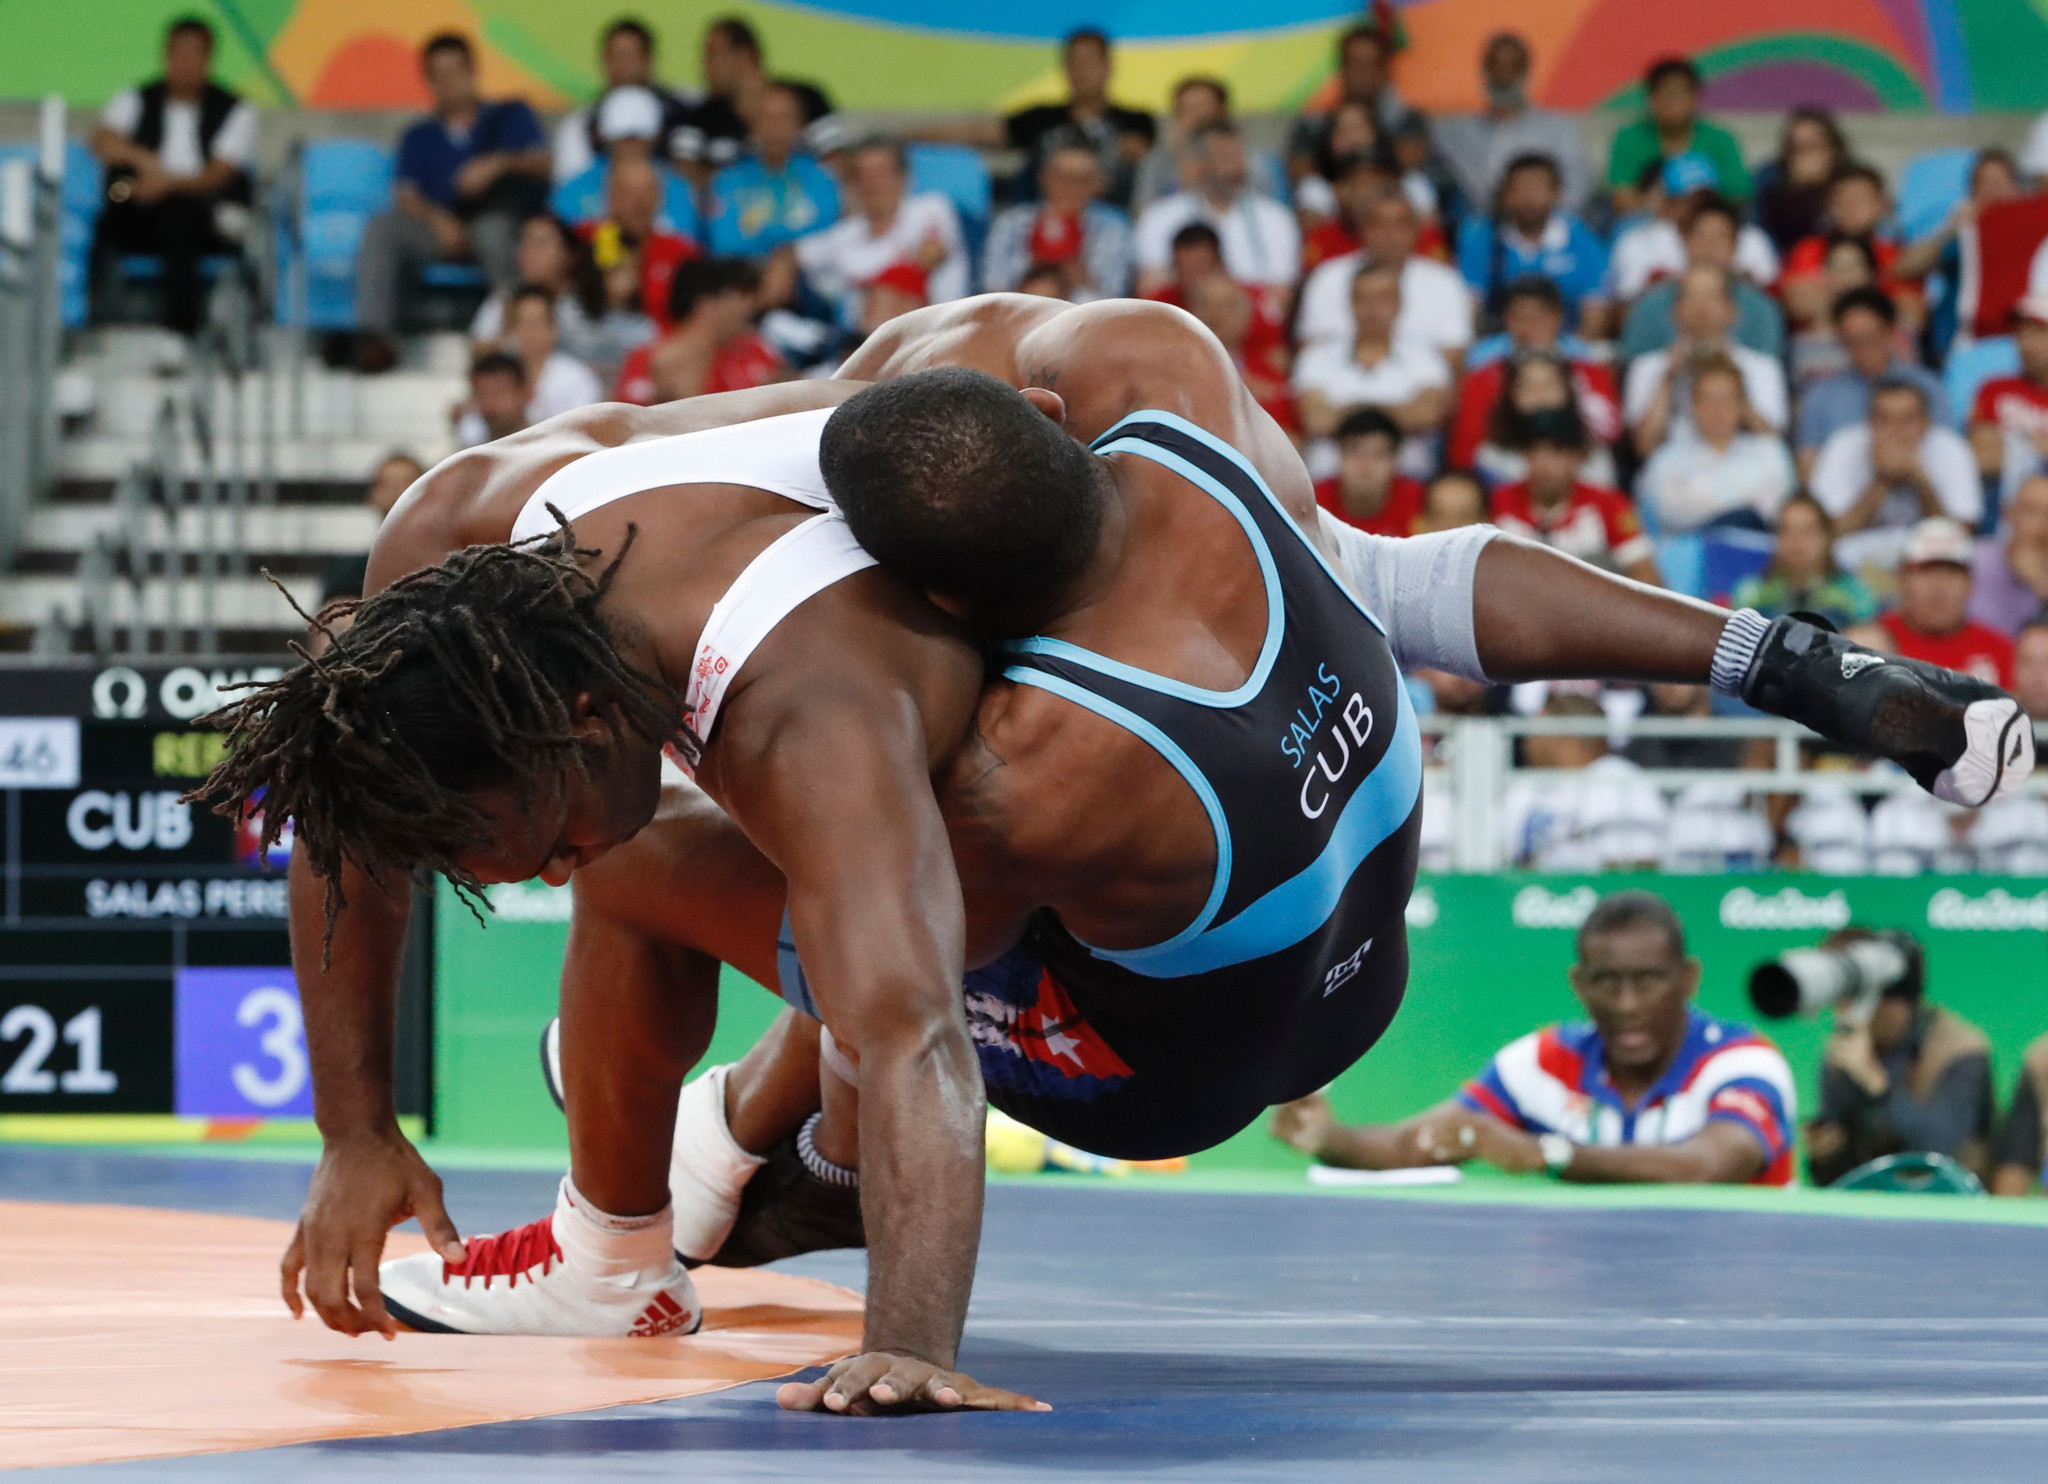 Cuba has enjoyed wrestling success at the World Championships and Olympic Games ©Getty Images